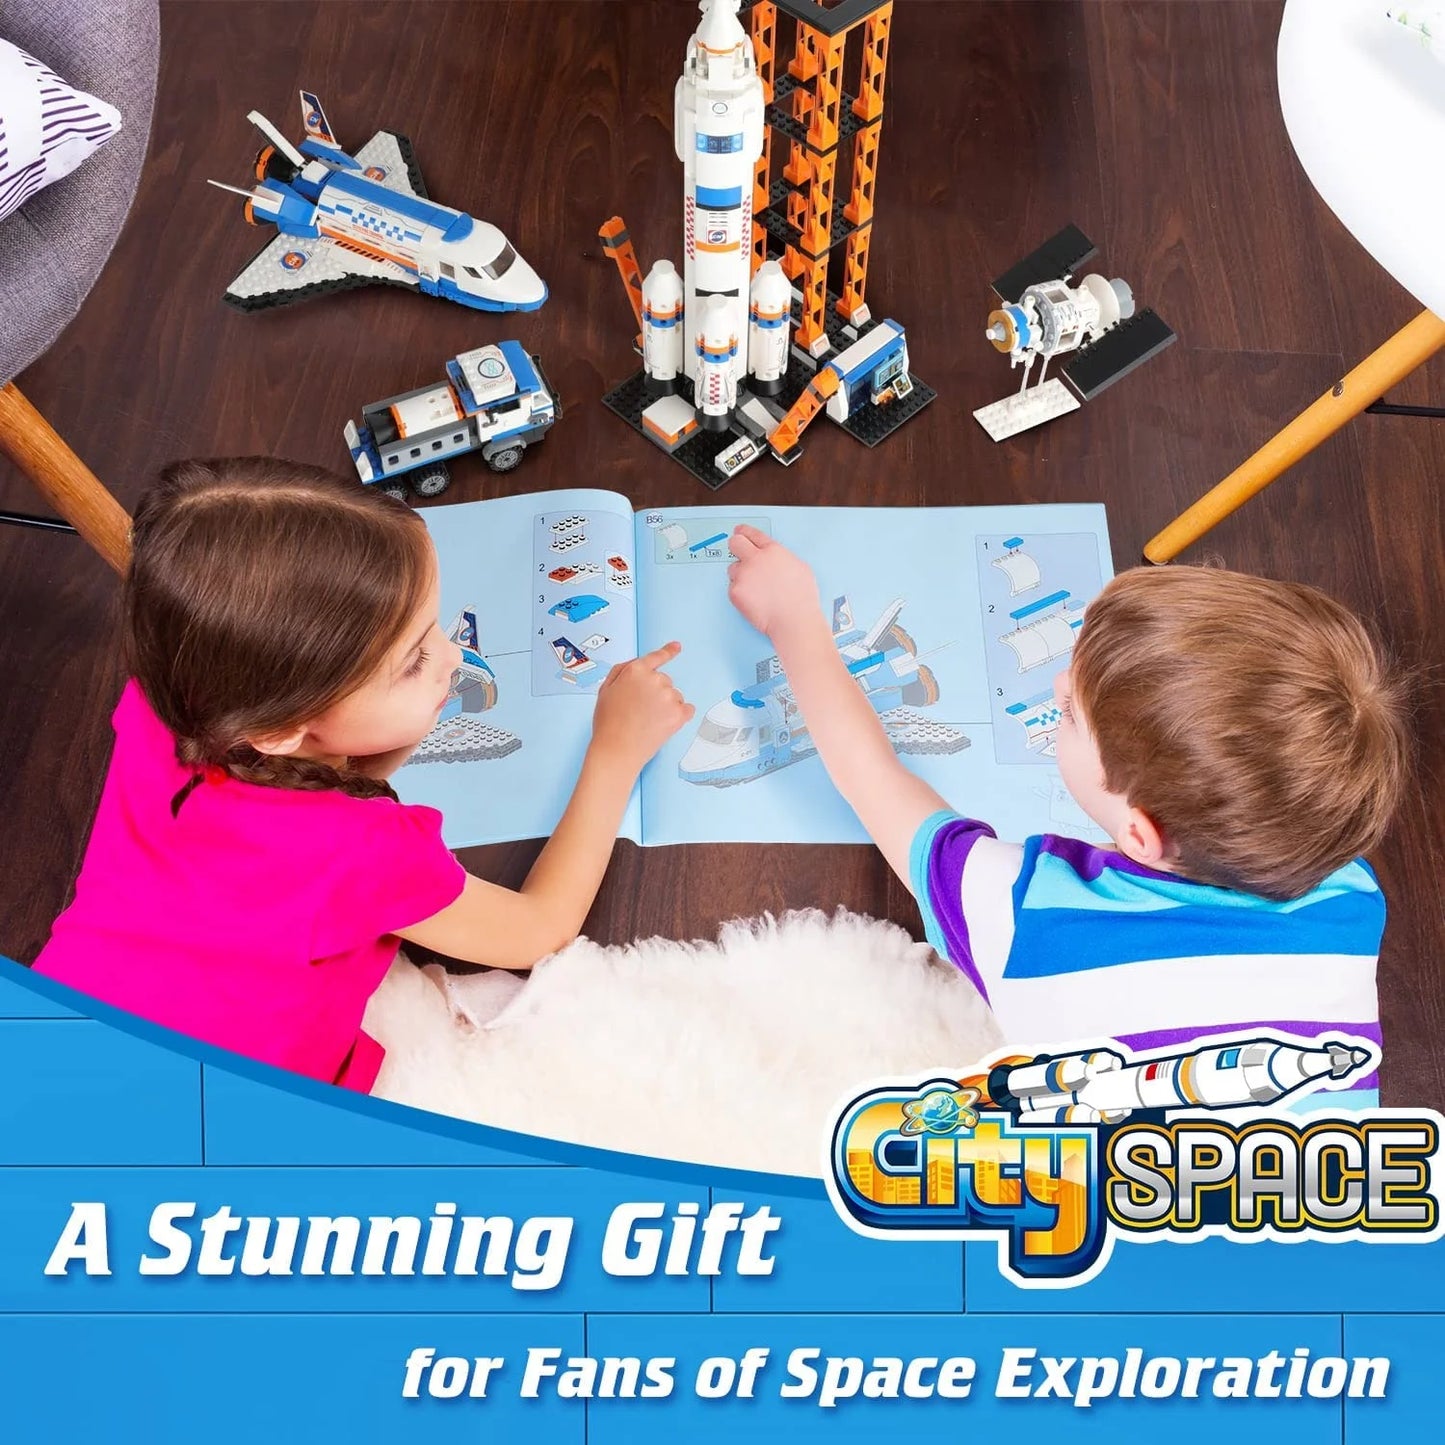 1091 Pieces City Space Shuttle and Space Rocket Toy Building Blocks Set, Cool Spaceship Toy for Kids, Astronaut Roleplay STEM Toy for Boys and Girls Age 6-12